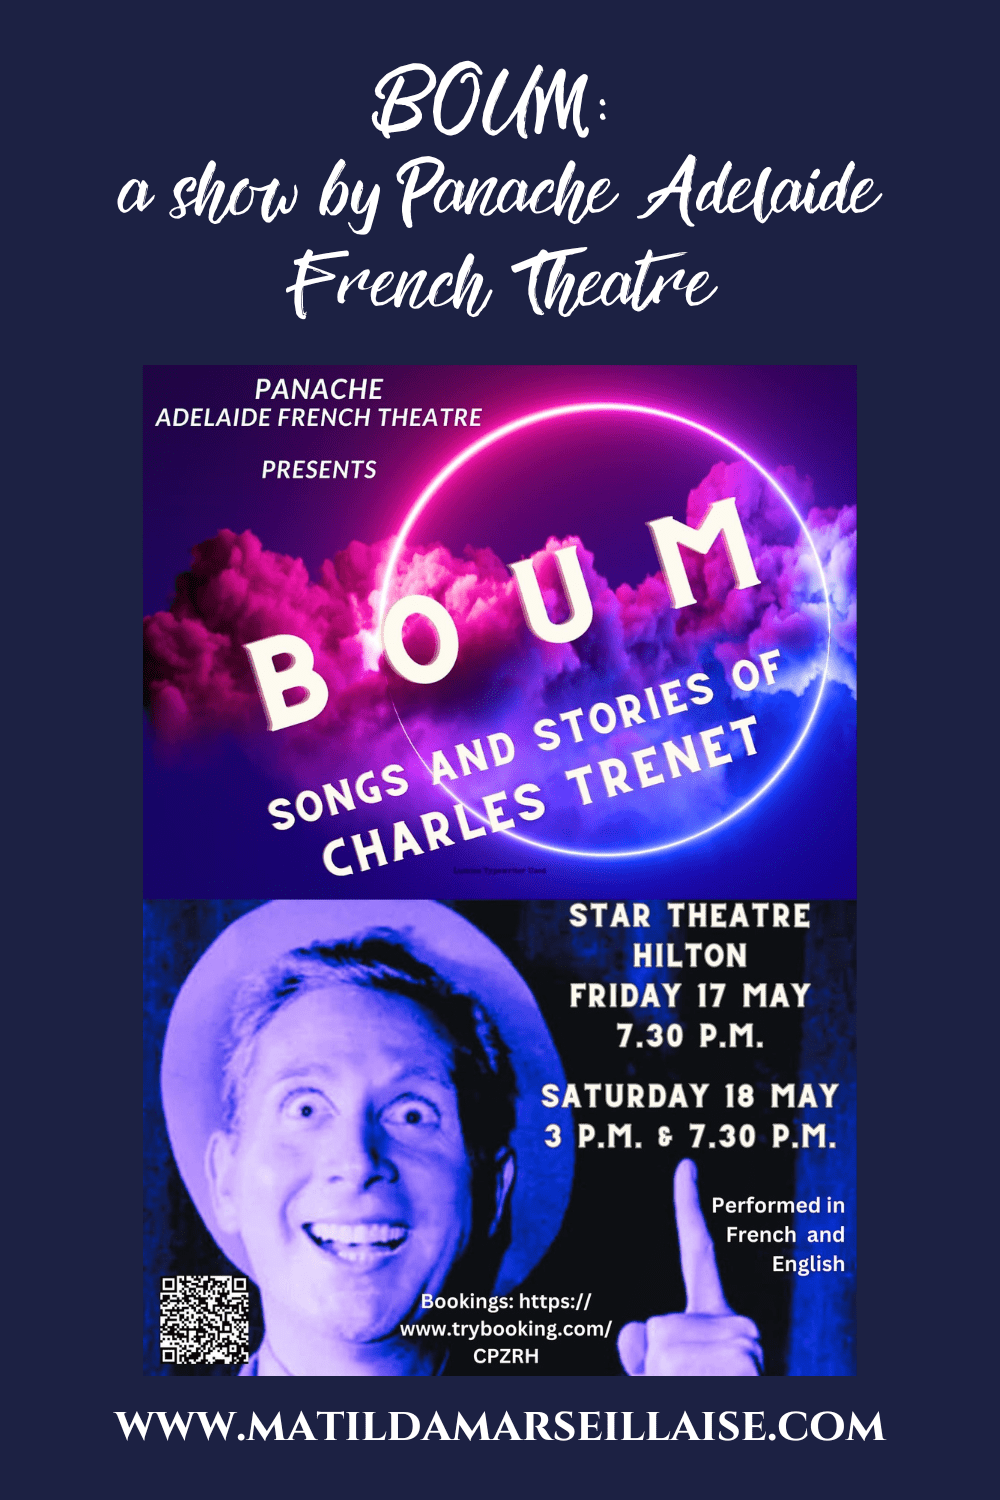 Boum, a show about the life and music of Charles Trenet will be in Adelaide next weekend